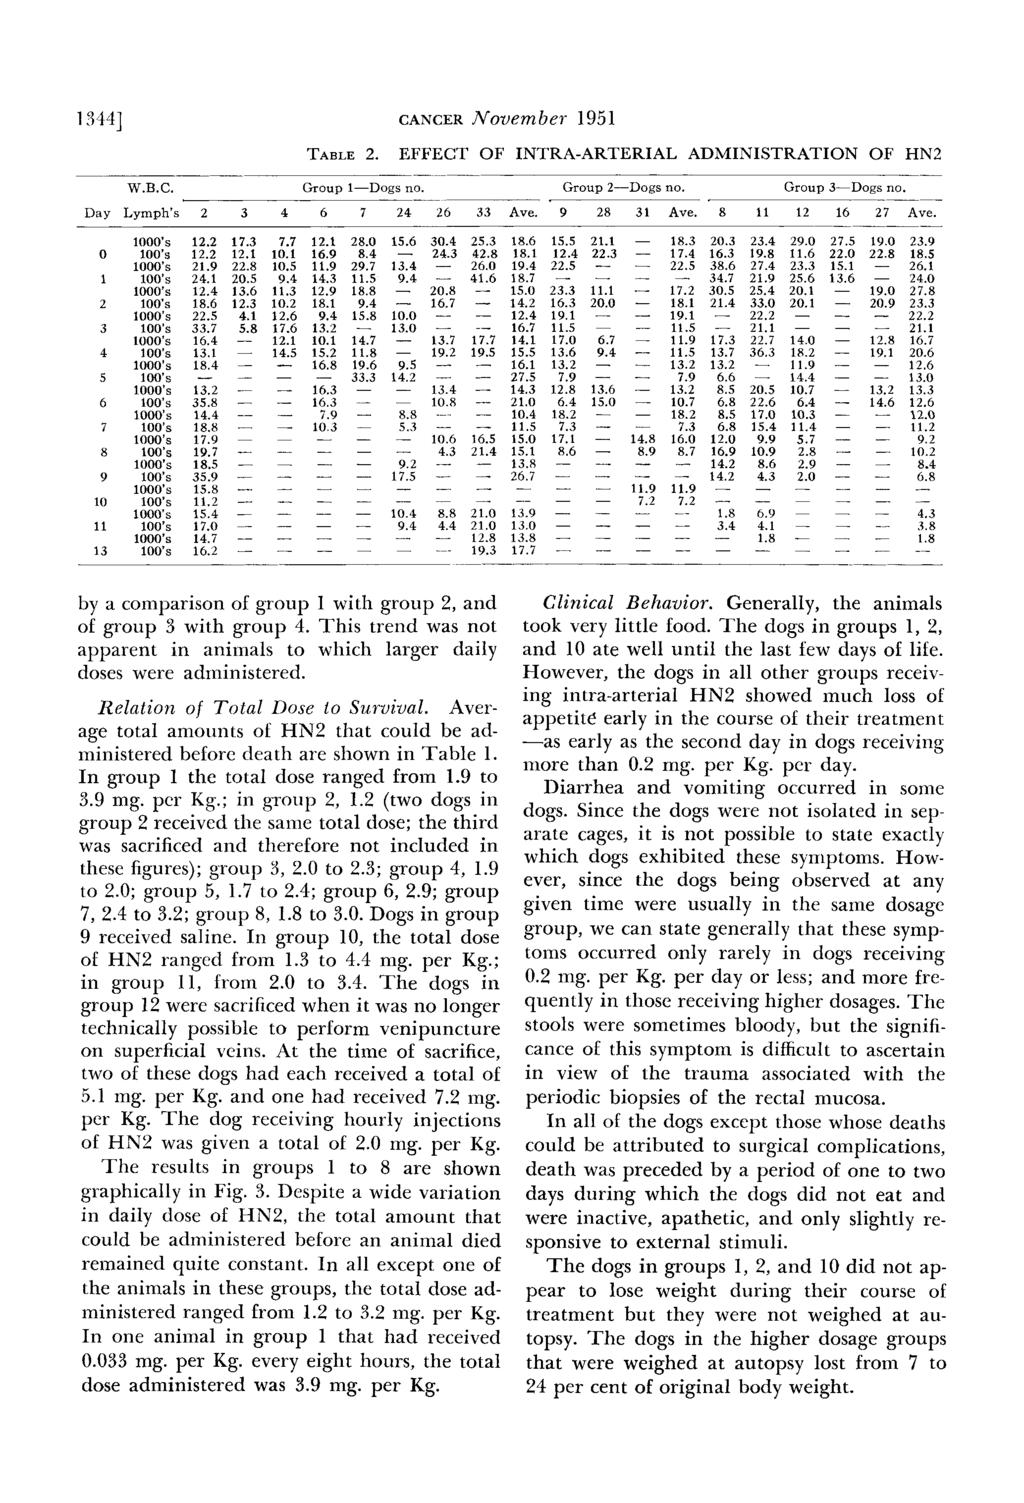 ~ 13441 CANCER November 195 1 TABLE 2. EFFECT OF INTRAARTERIAL ADMINISTRATION OF HN2 W.B.C. Group 1Dogs no. Group 2Dogs no. Group 3Dogs no. Day Lymph's 2 3 4 6 7 24 26 33 Ave. 9 28 31 Ave.